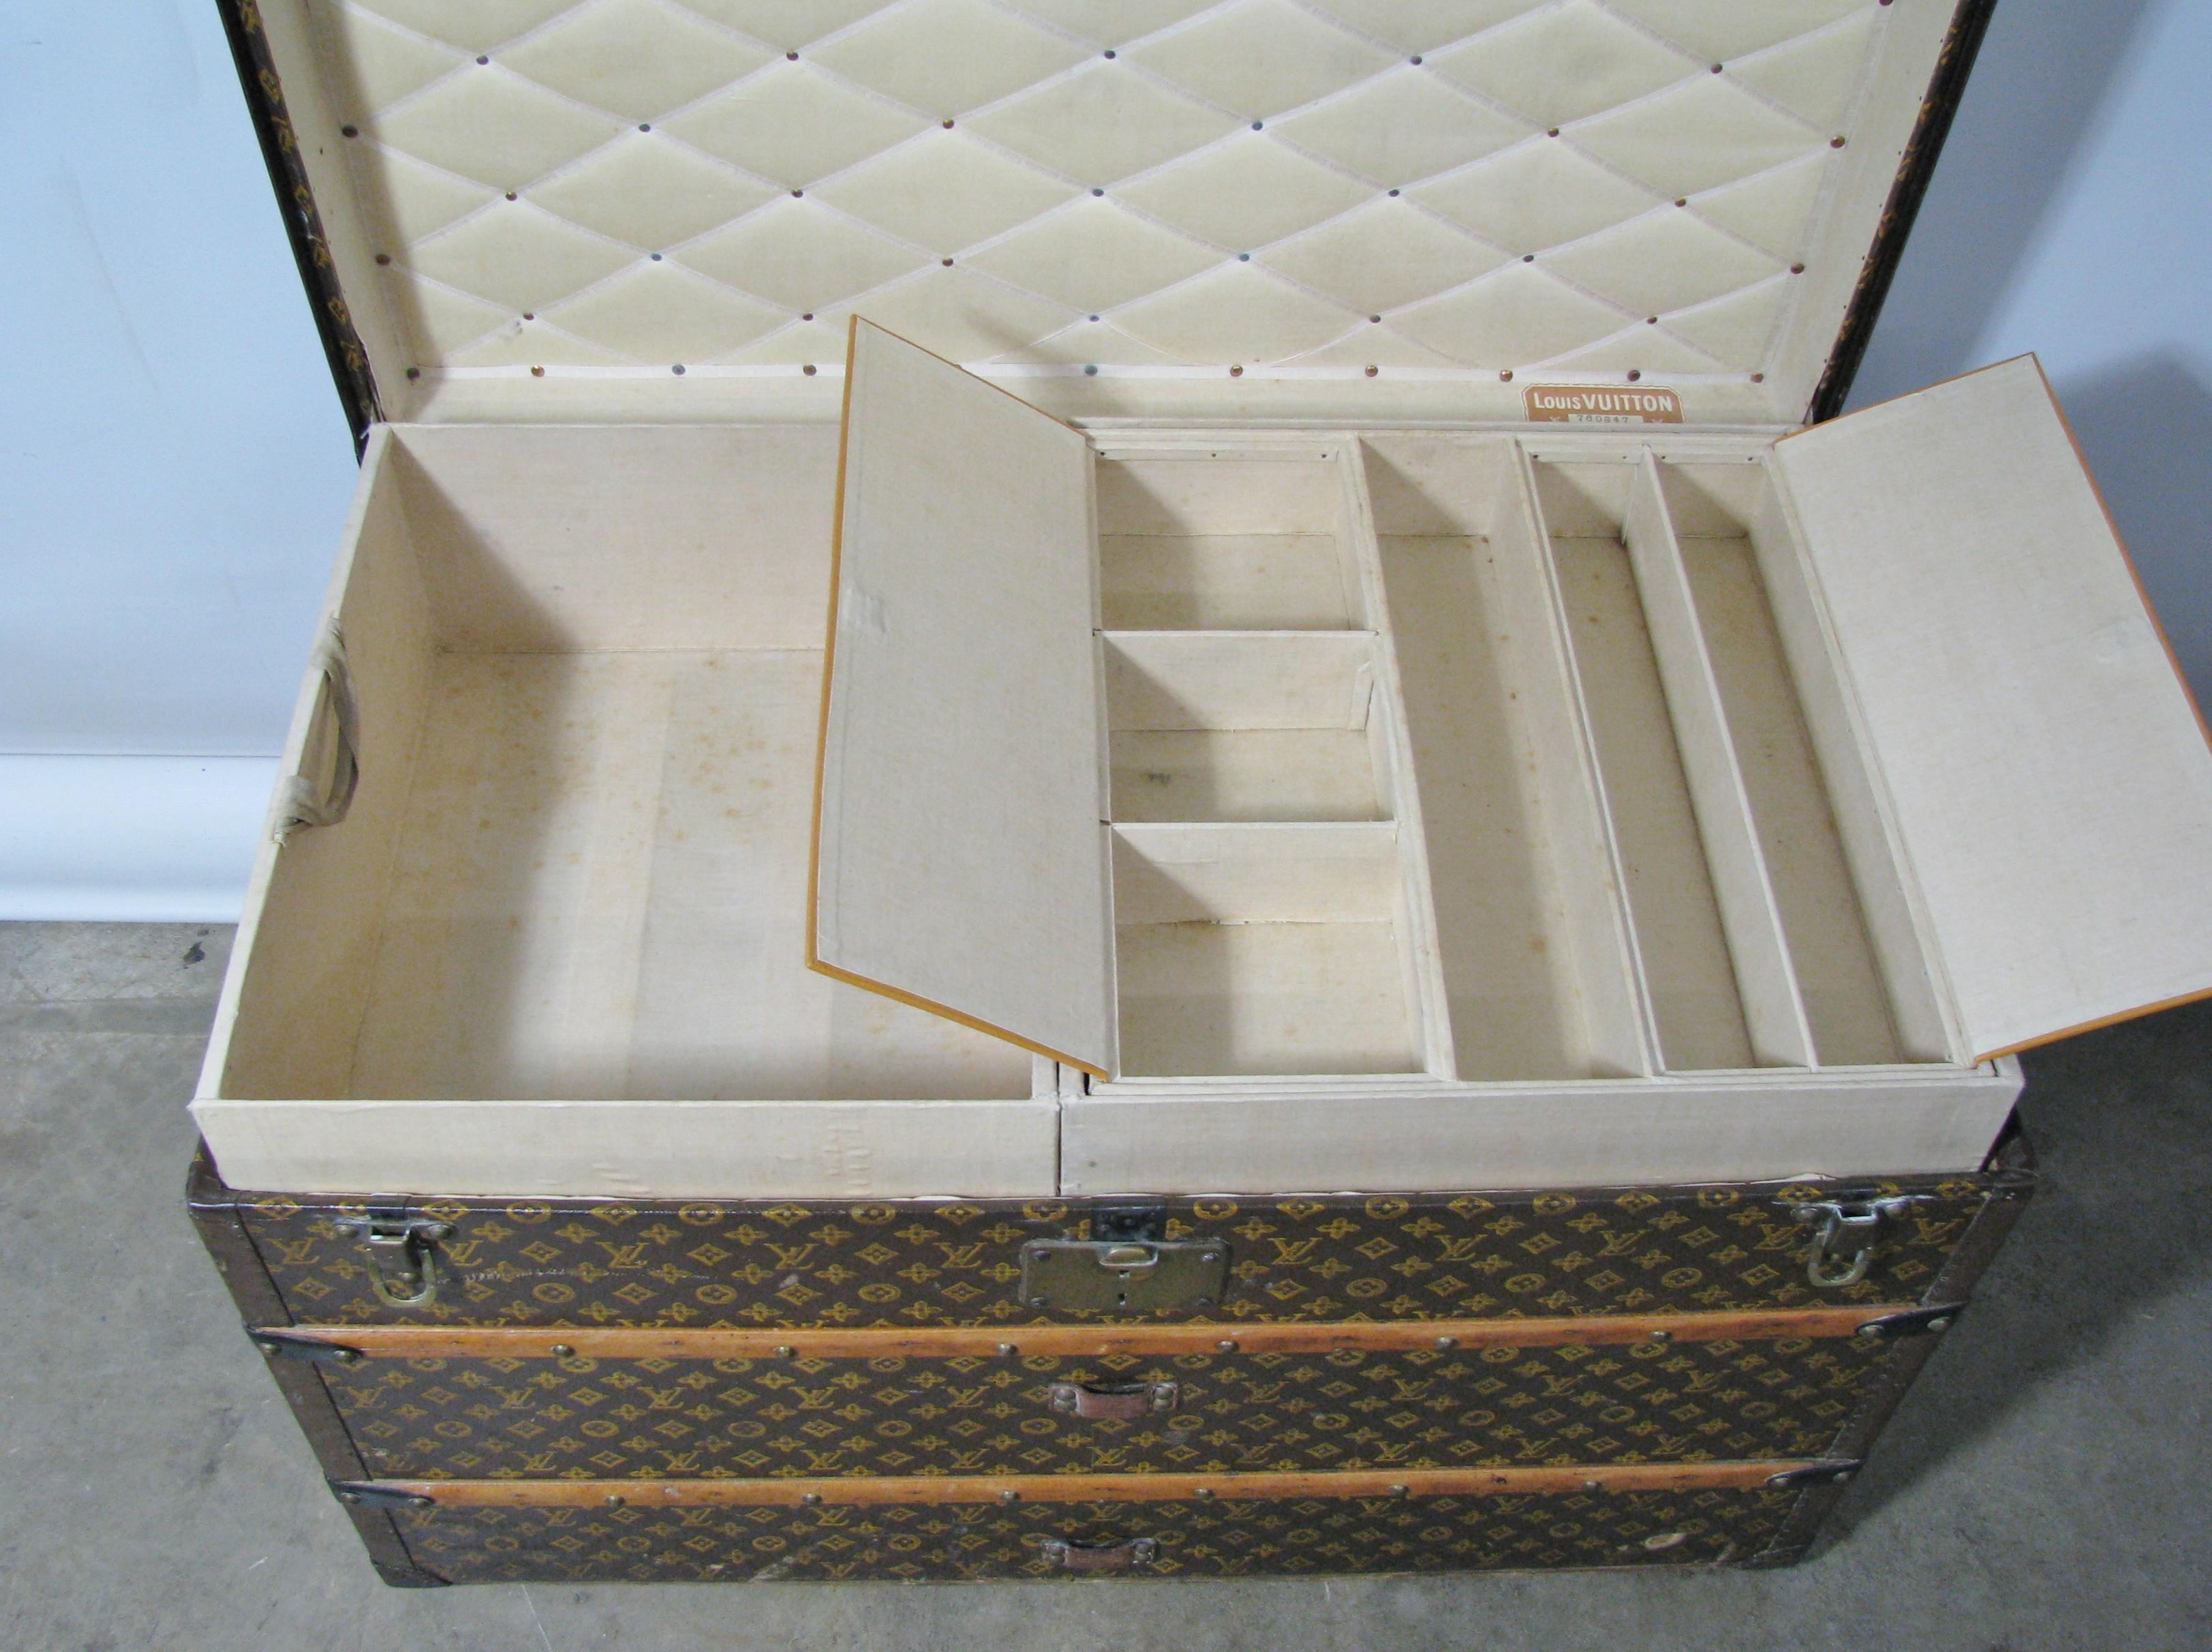 Vintage Late 1920s Louis Vuitton Steamer Trunk with Original Trays and Label For Sale 3